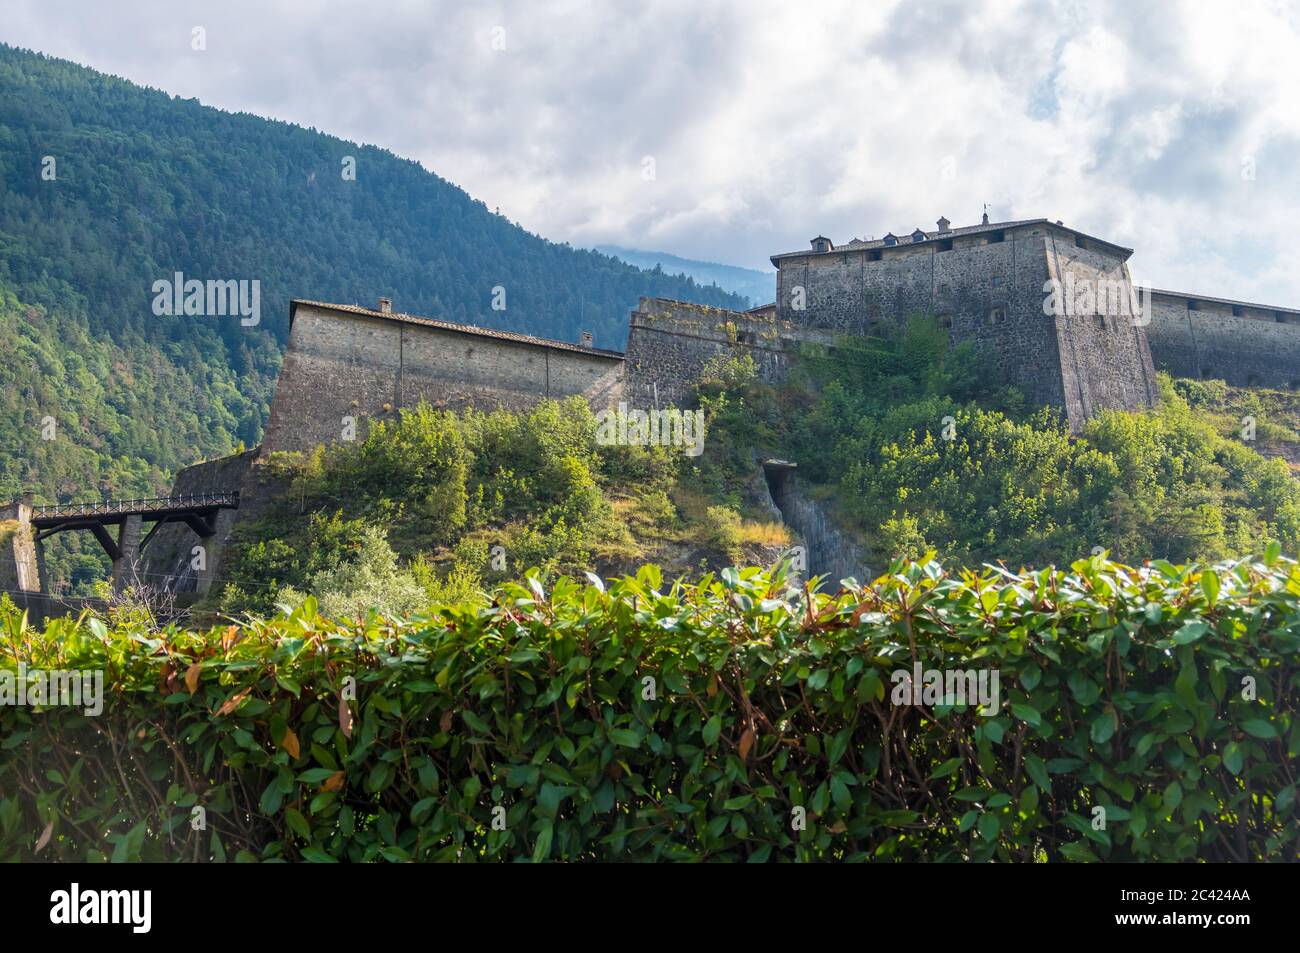 Exilles, Italy - August 21, 2019: The Exilles Fort is a fortified complex in the Susa Valley, Metropolitan City of Turin, Piedmont, northern Italy Stock Photo